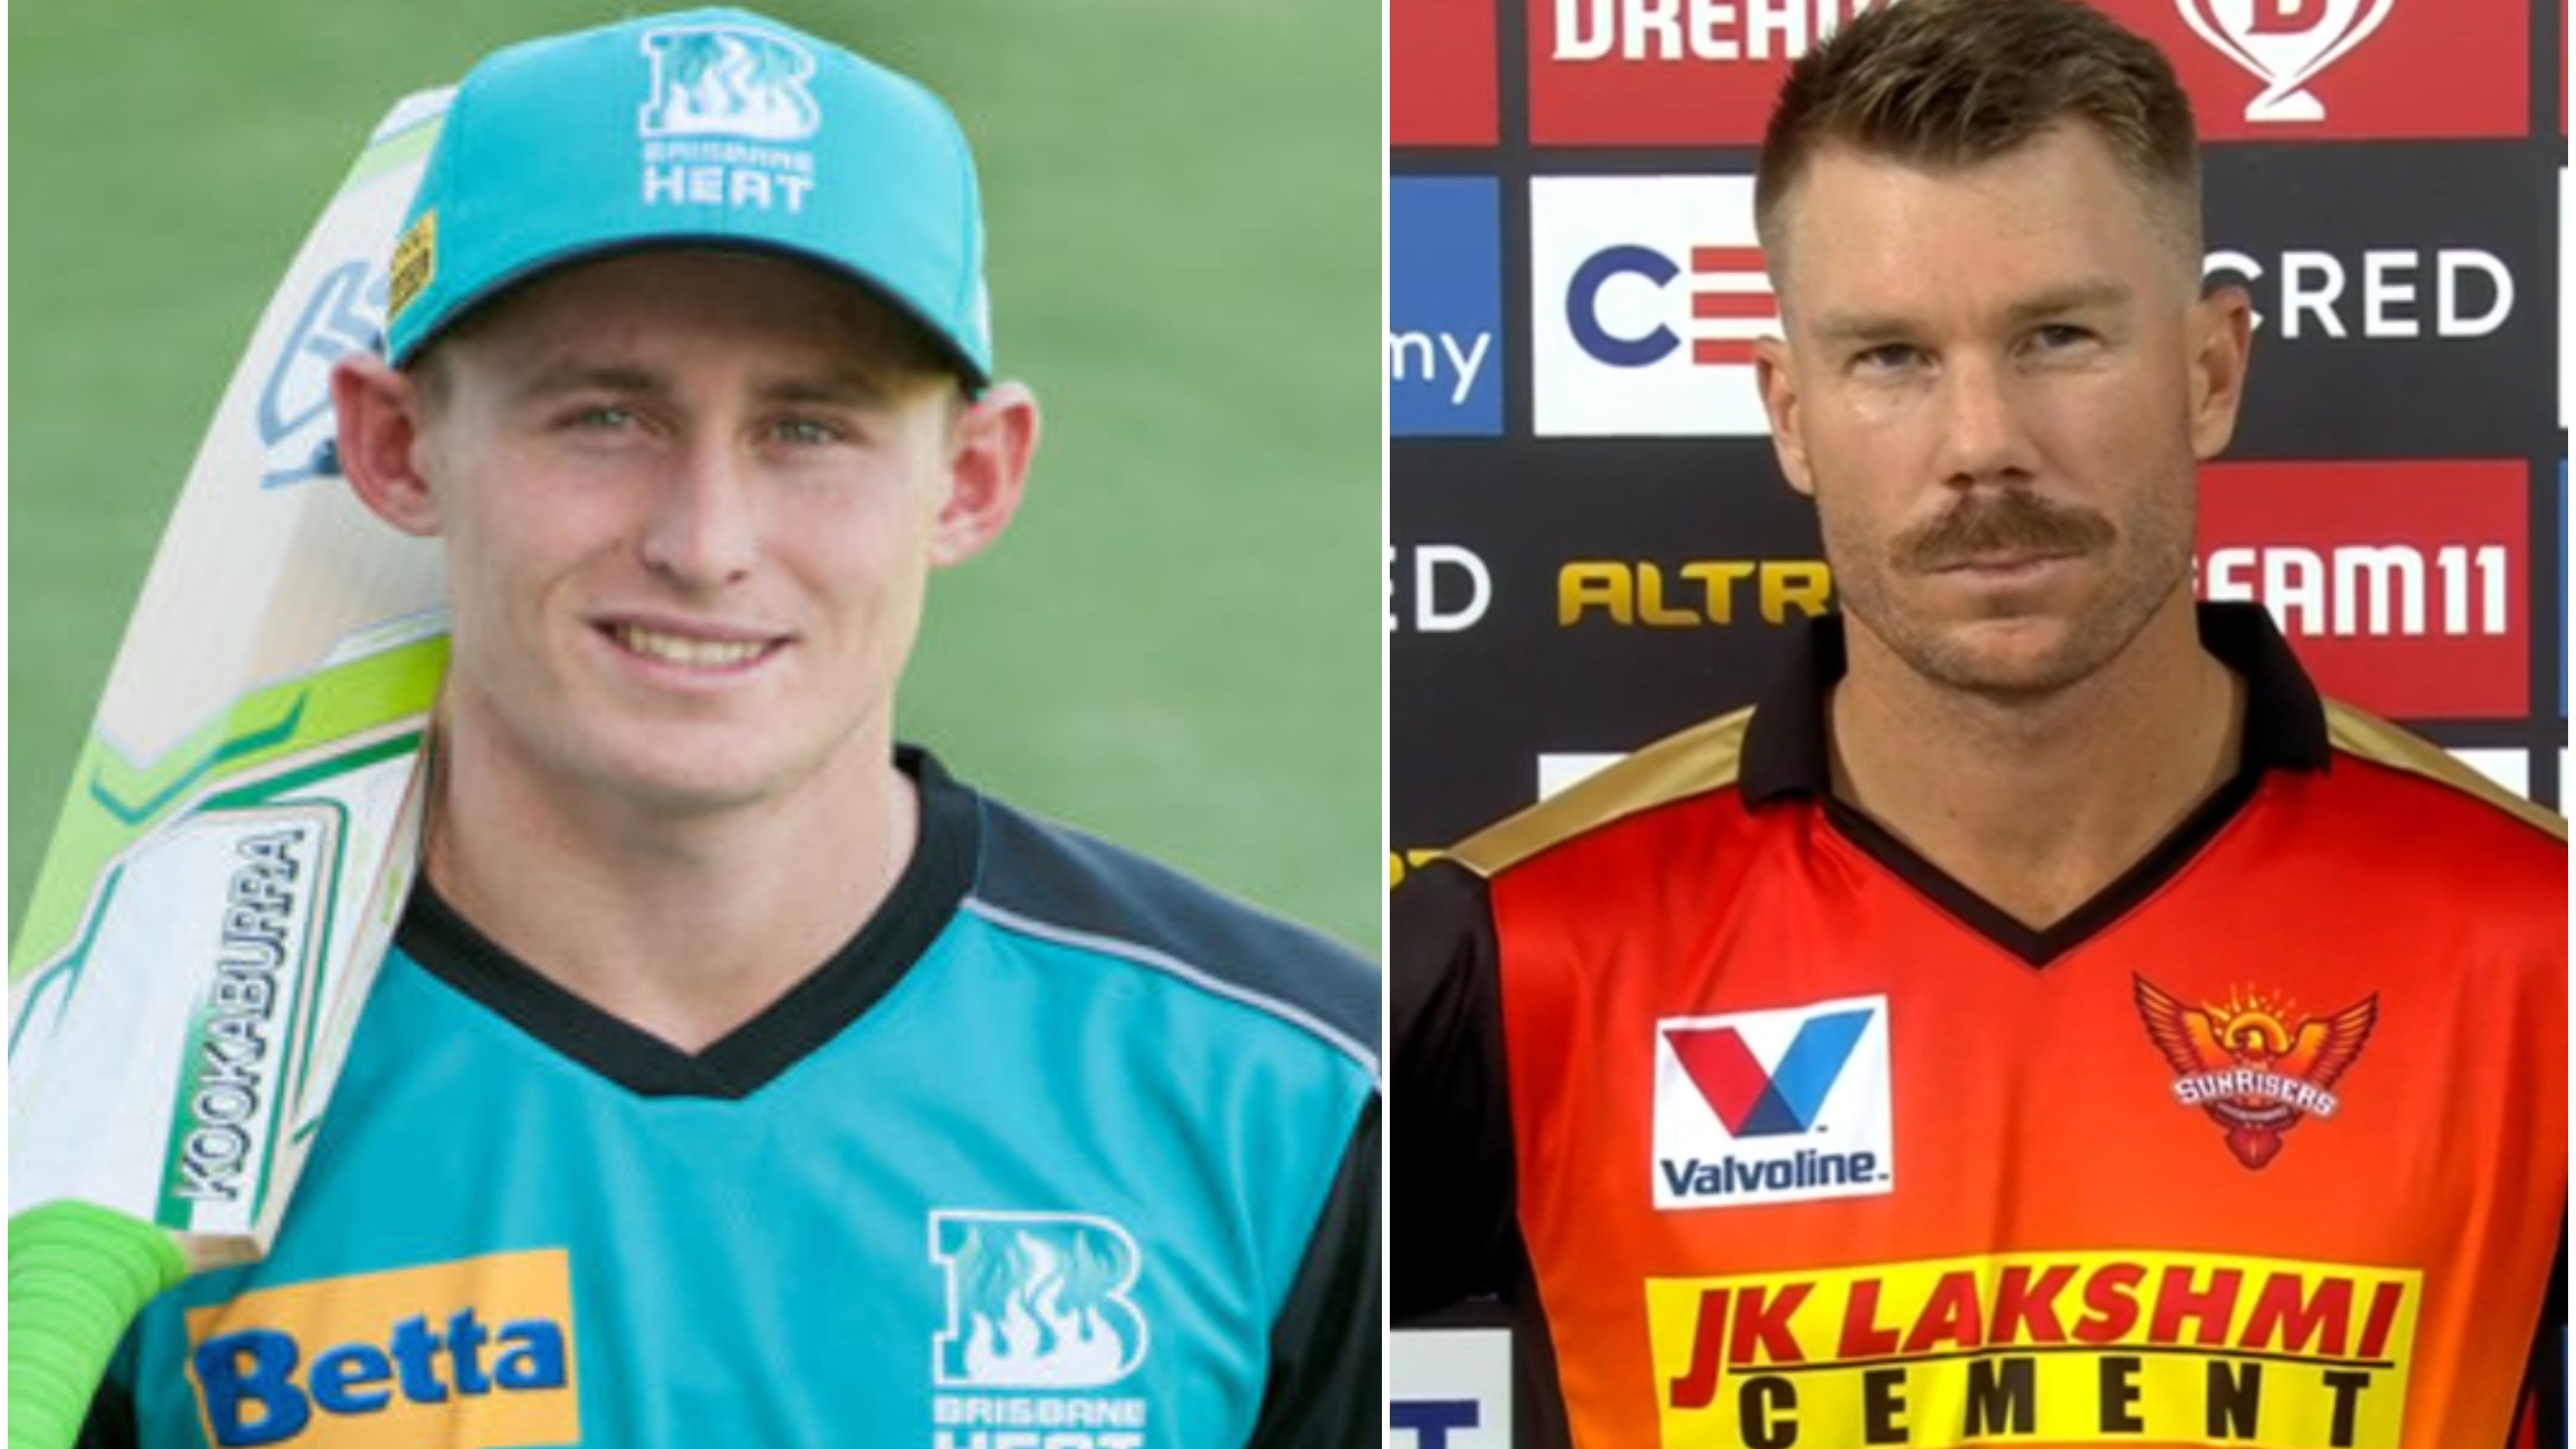 IPL 2022: David Warner replies to Marnus Labuschagne’s tweet asking “who are you backing to win” the IPL